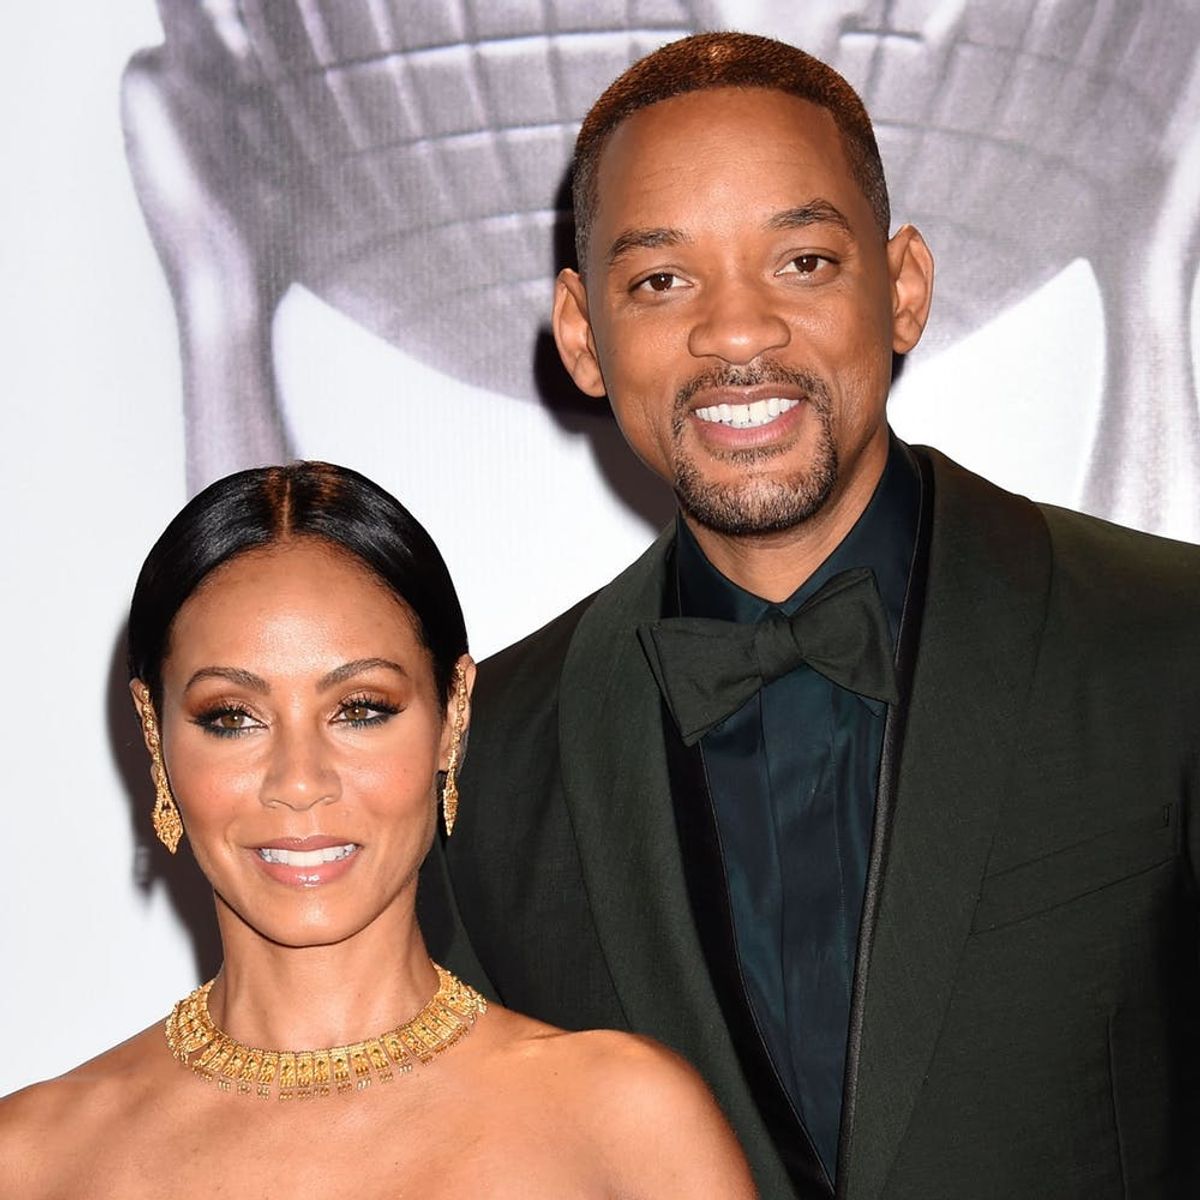 You Have to Read Will Smith’s Heartfelt Post to Jada Pinkett Smith on Their 20th Anniversary